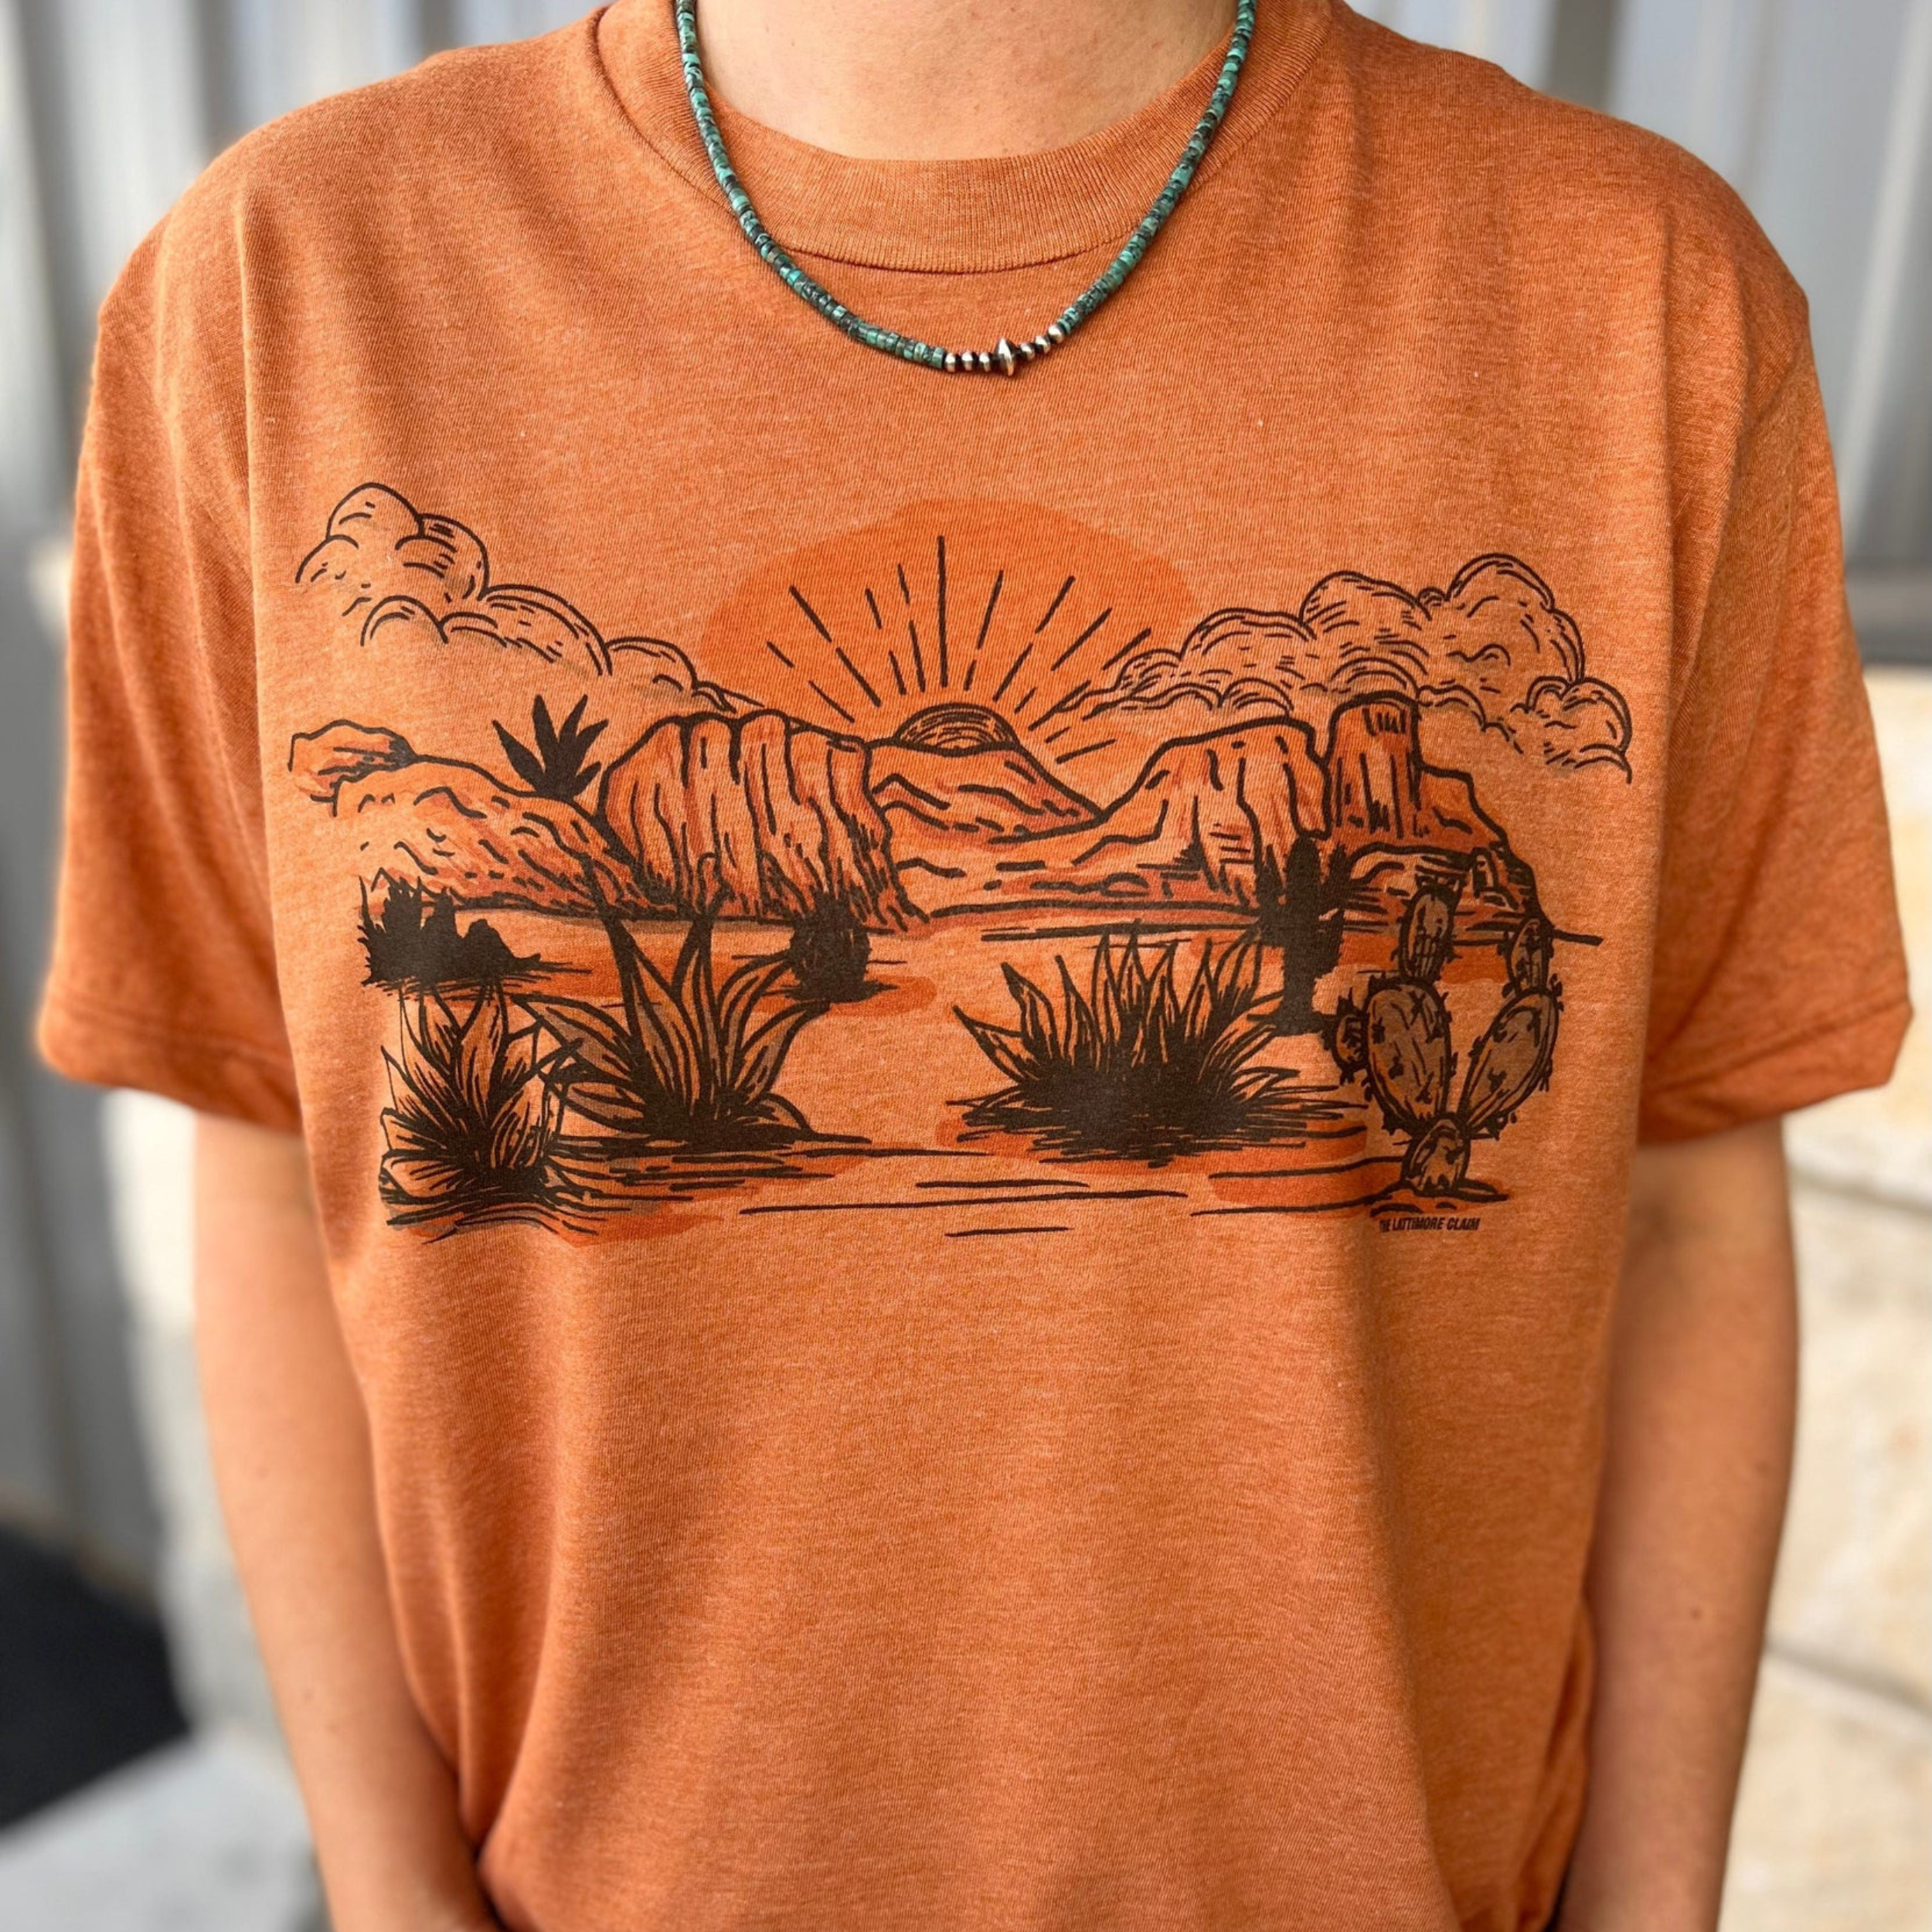 An orange short sleeve crewneck tee with a graphic in the center featuring cacti, desert flora, cliffs, and a sunset. Item is pictured on a multicolor background with white, grey, and black